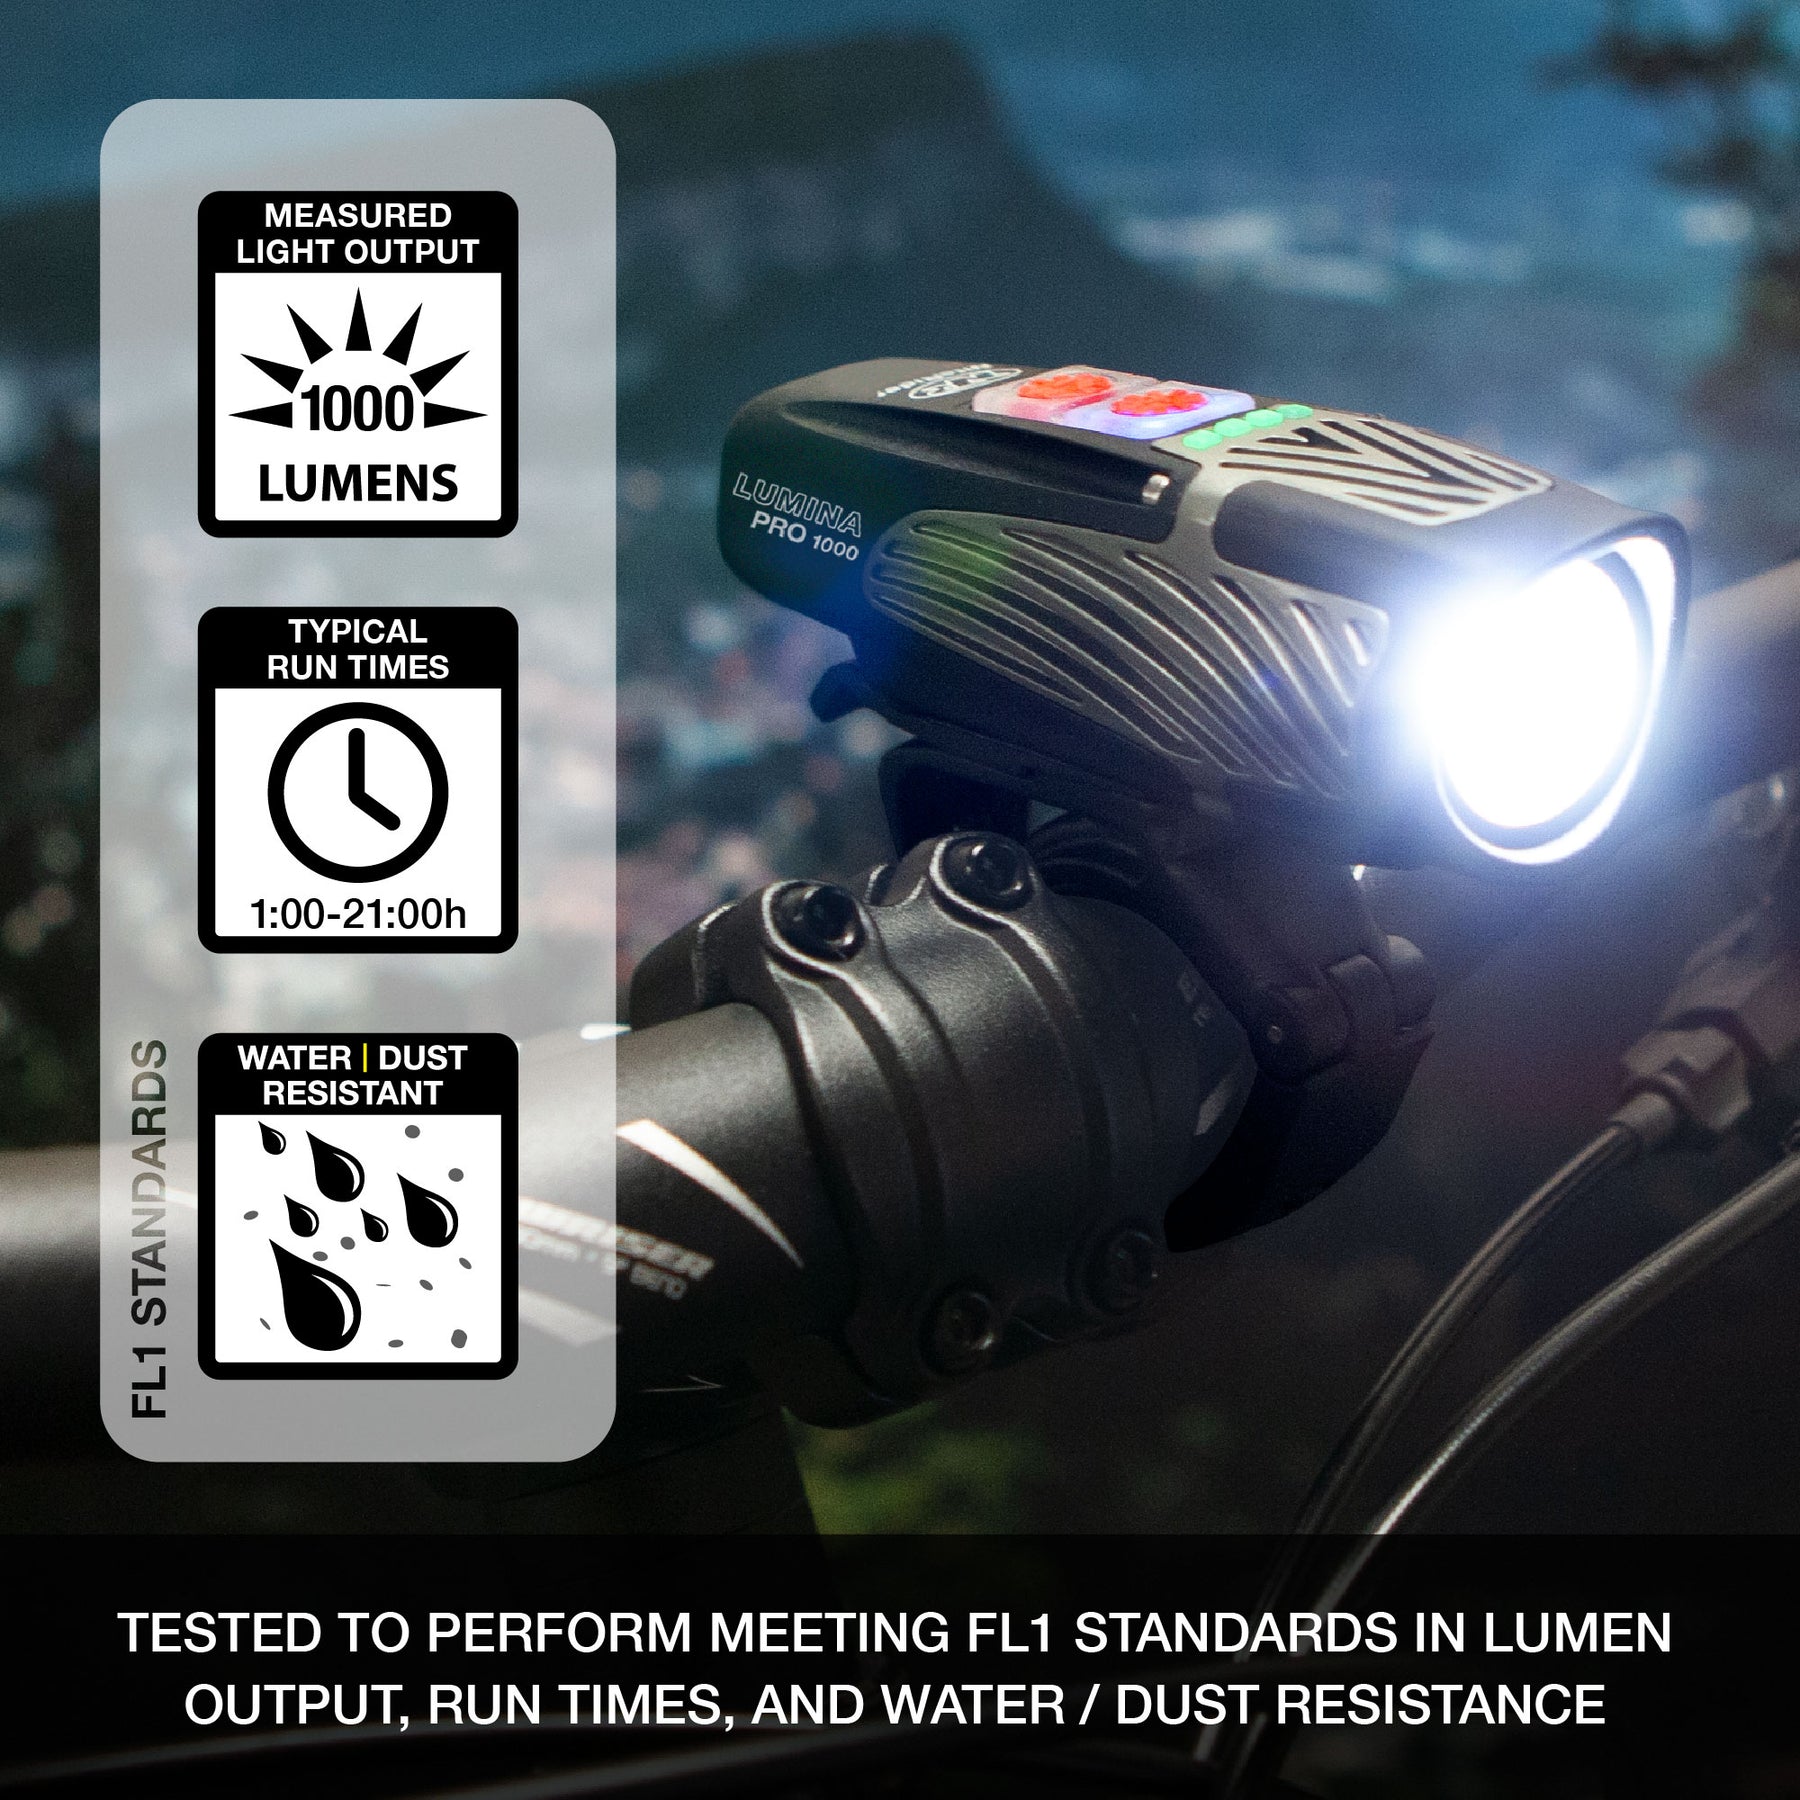 Clip-on Light Pro – Running Light With Magnetic Attachment for Extra Safety  and Visibility 